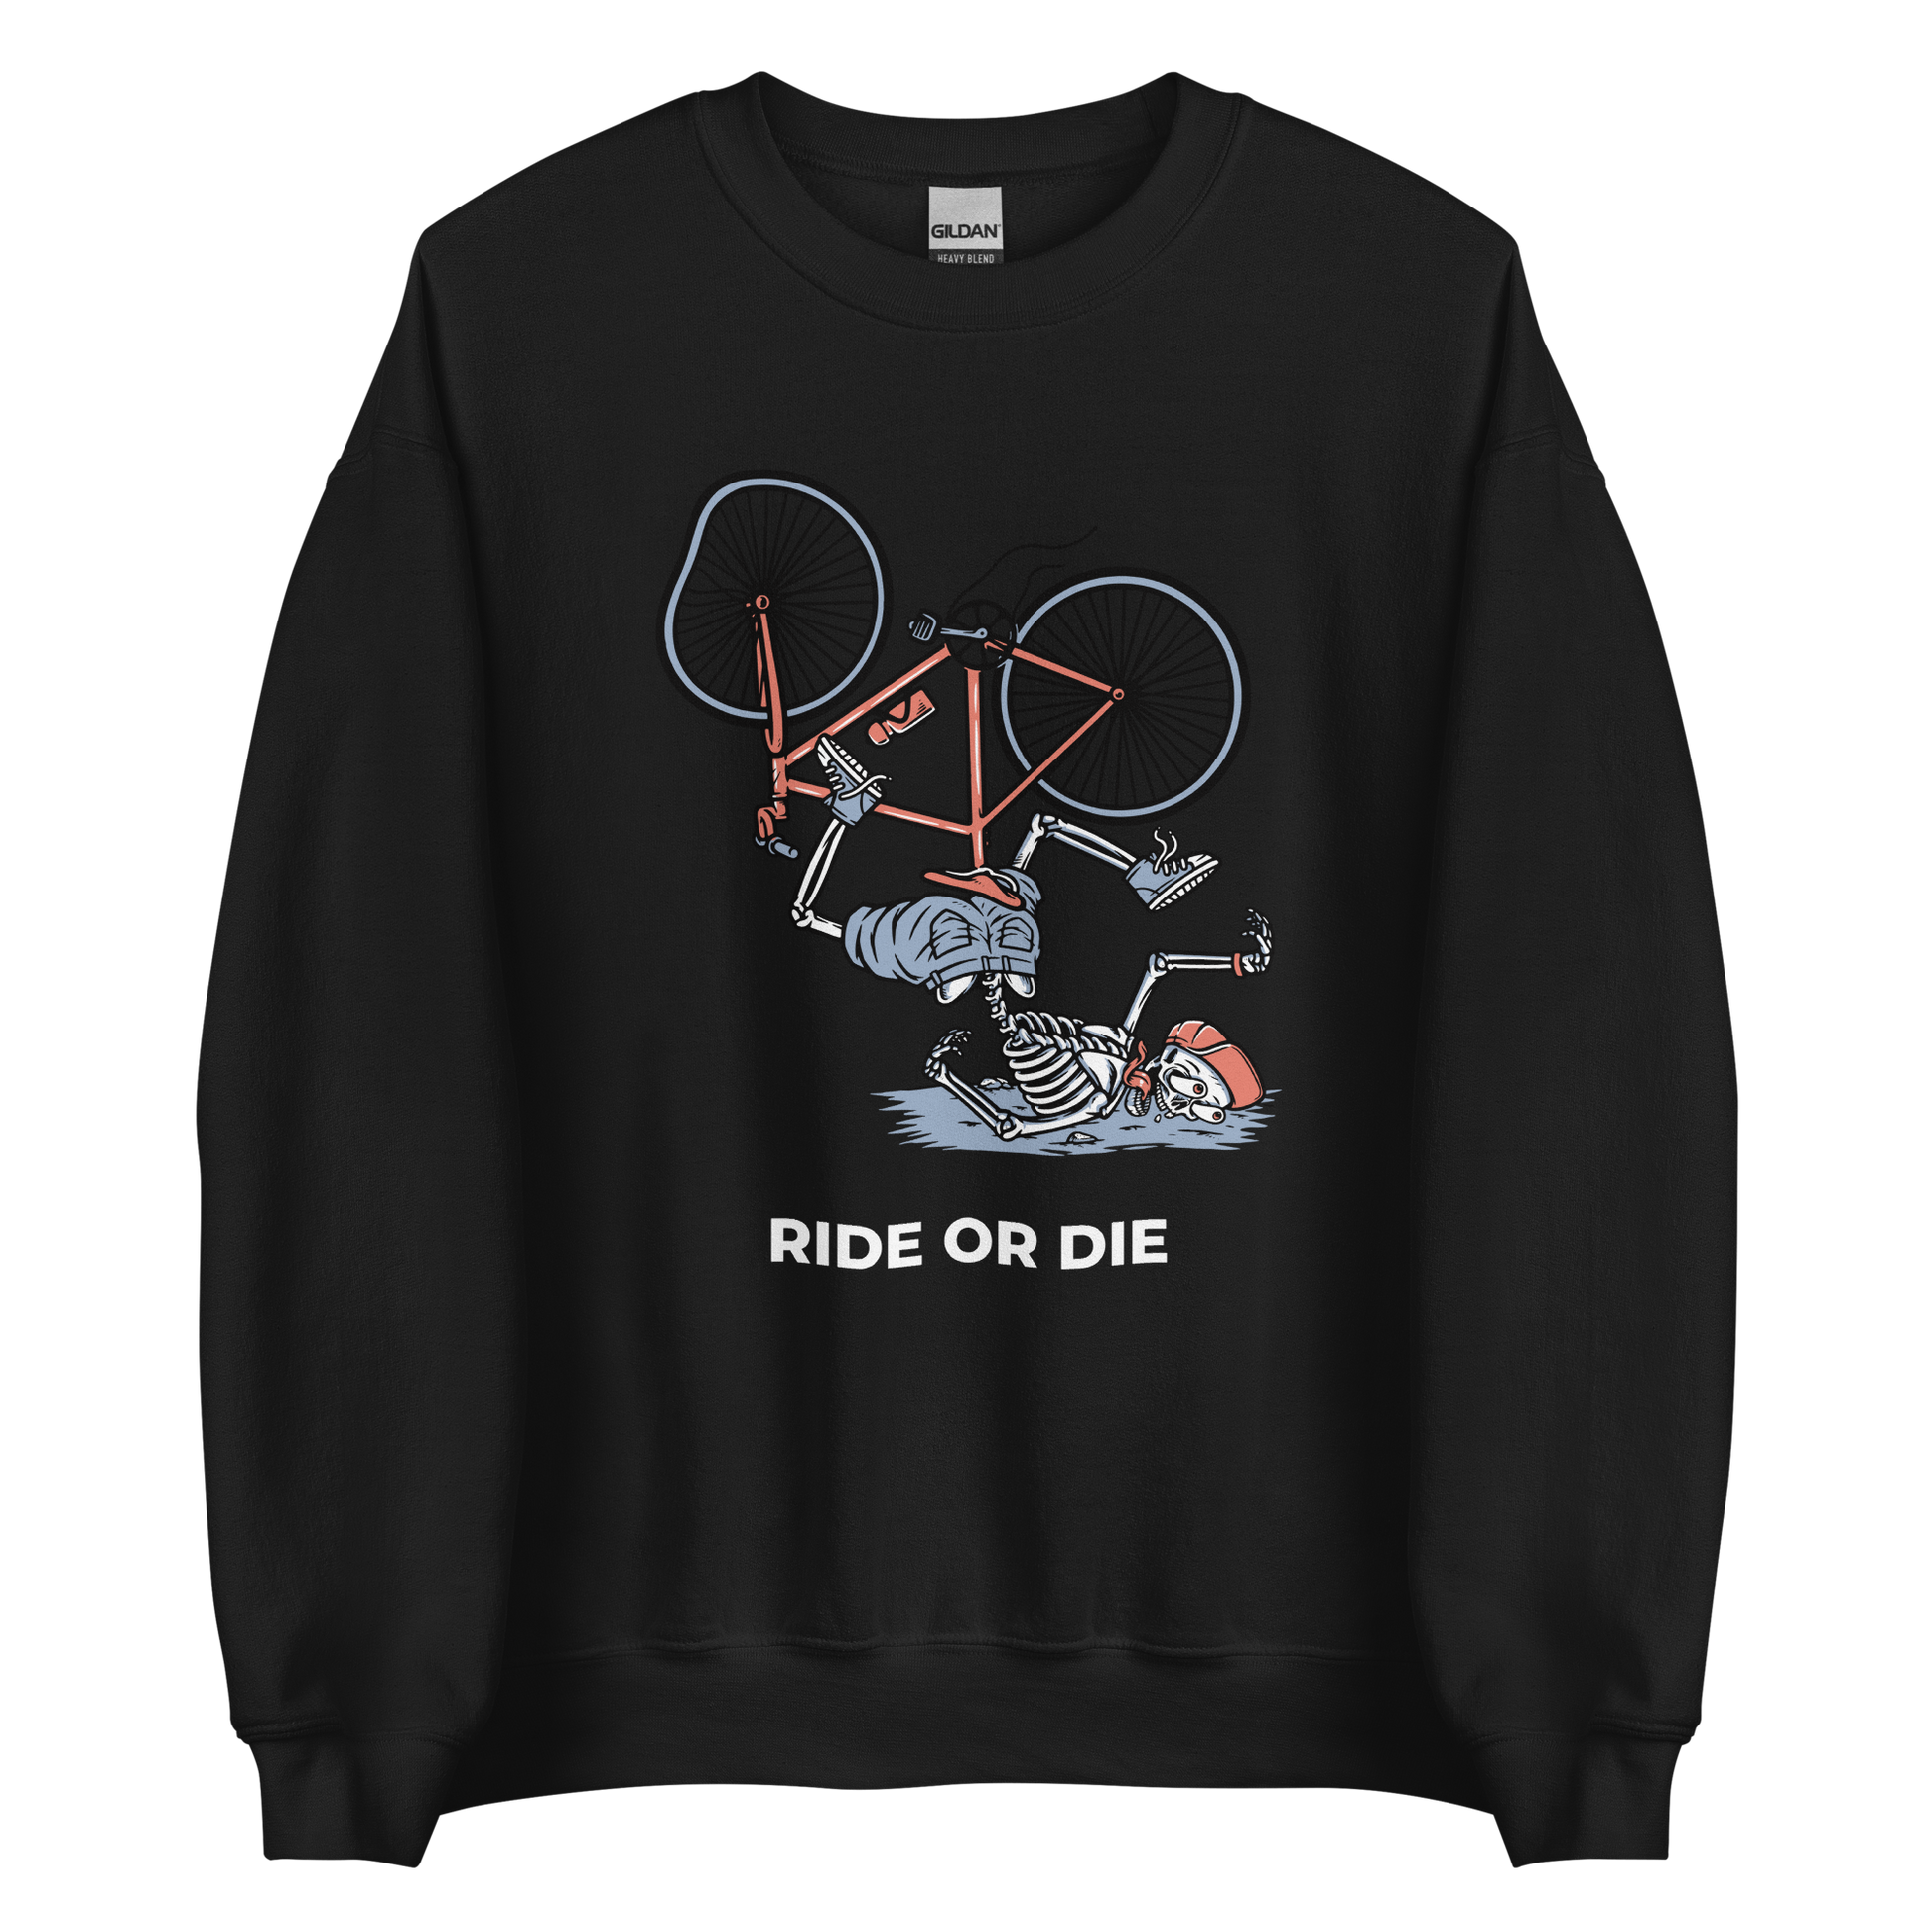 Black Ride or Die Sweatshirt featuring a bold Skeleton Falling While Riding a Bicycle graphic on the chest - Funny Graphic Skeleton Sweatshirts - Boozy Fox